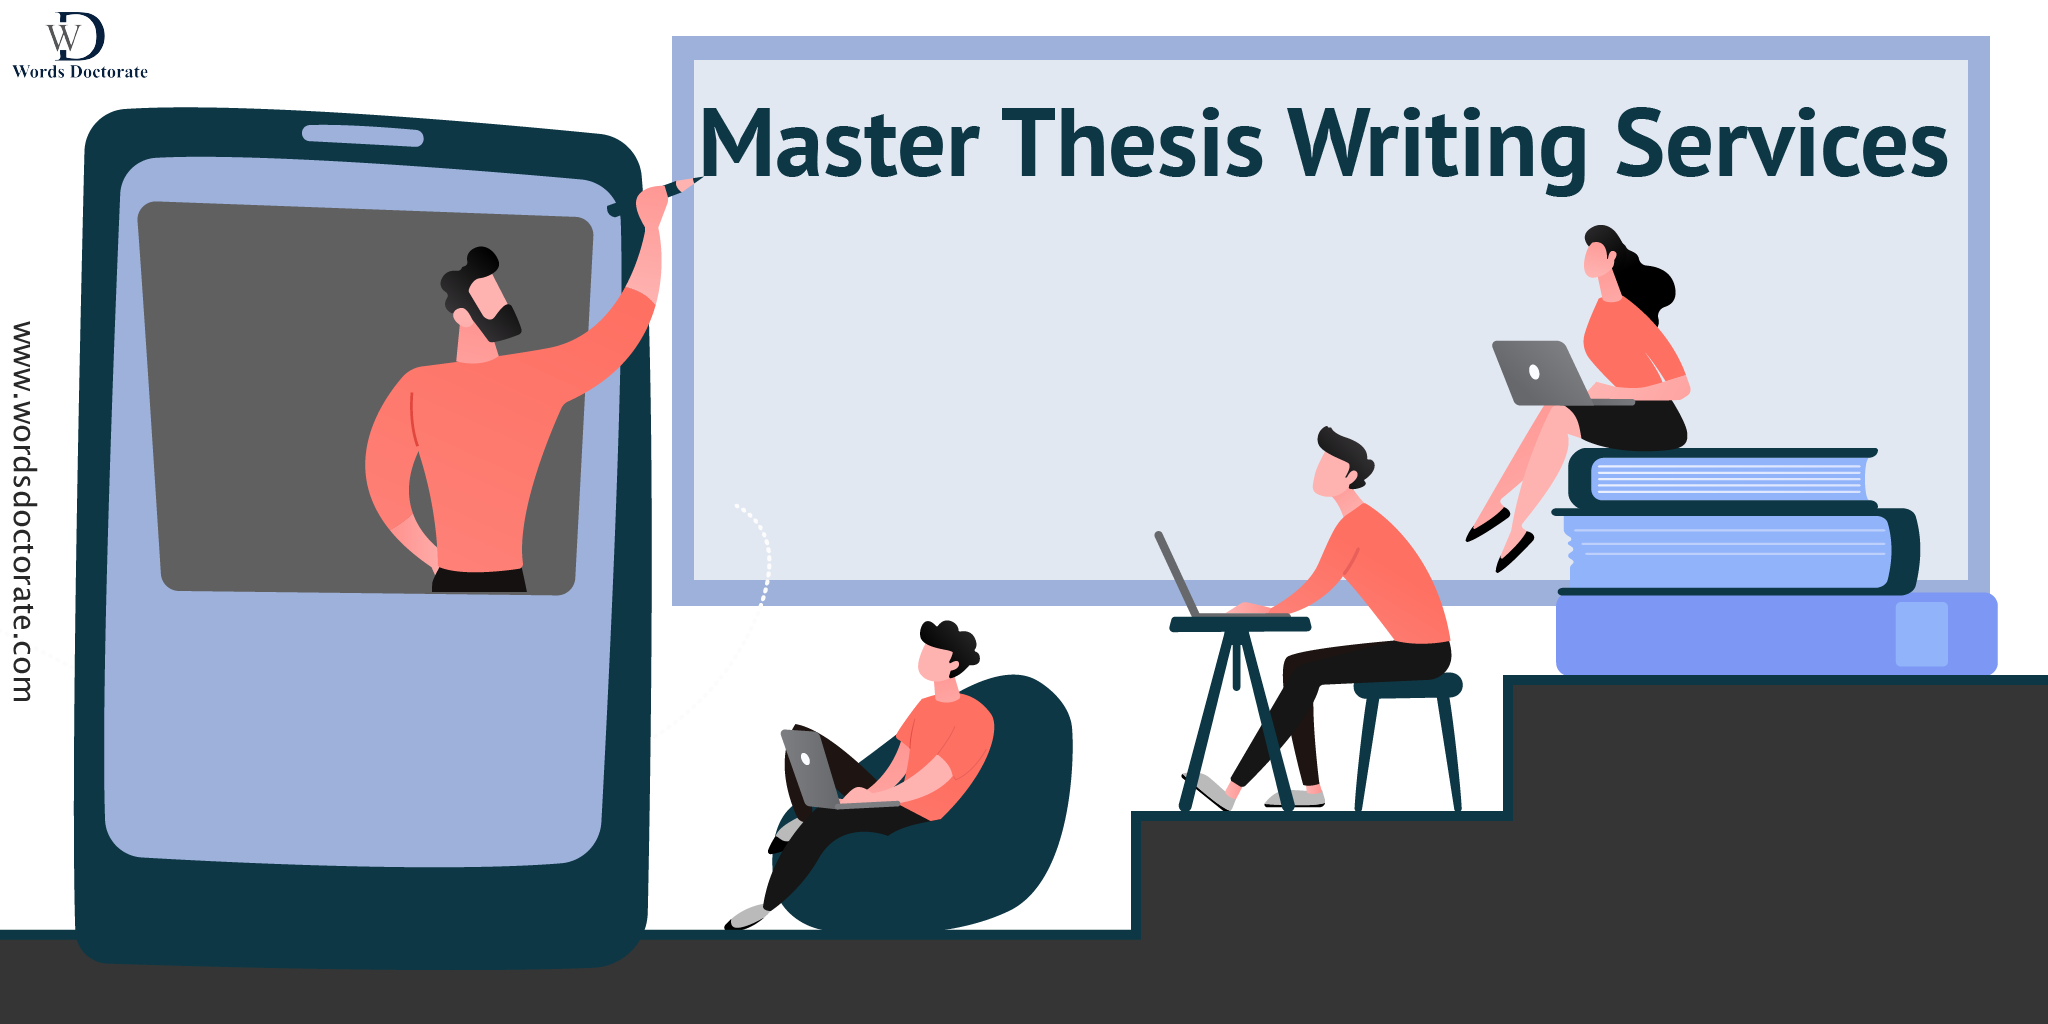 master's thesis training